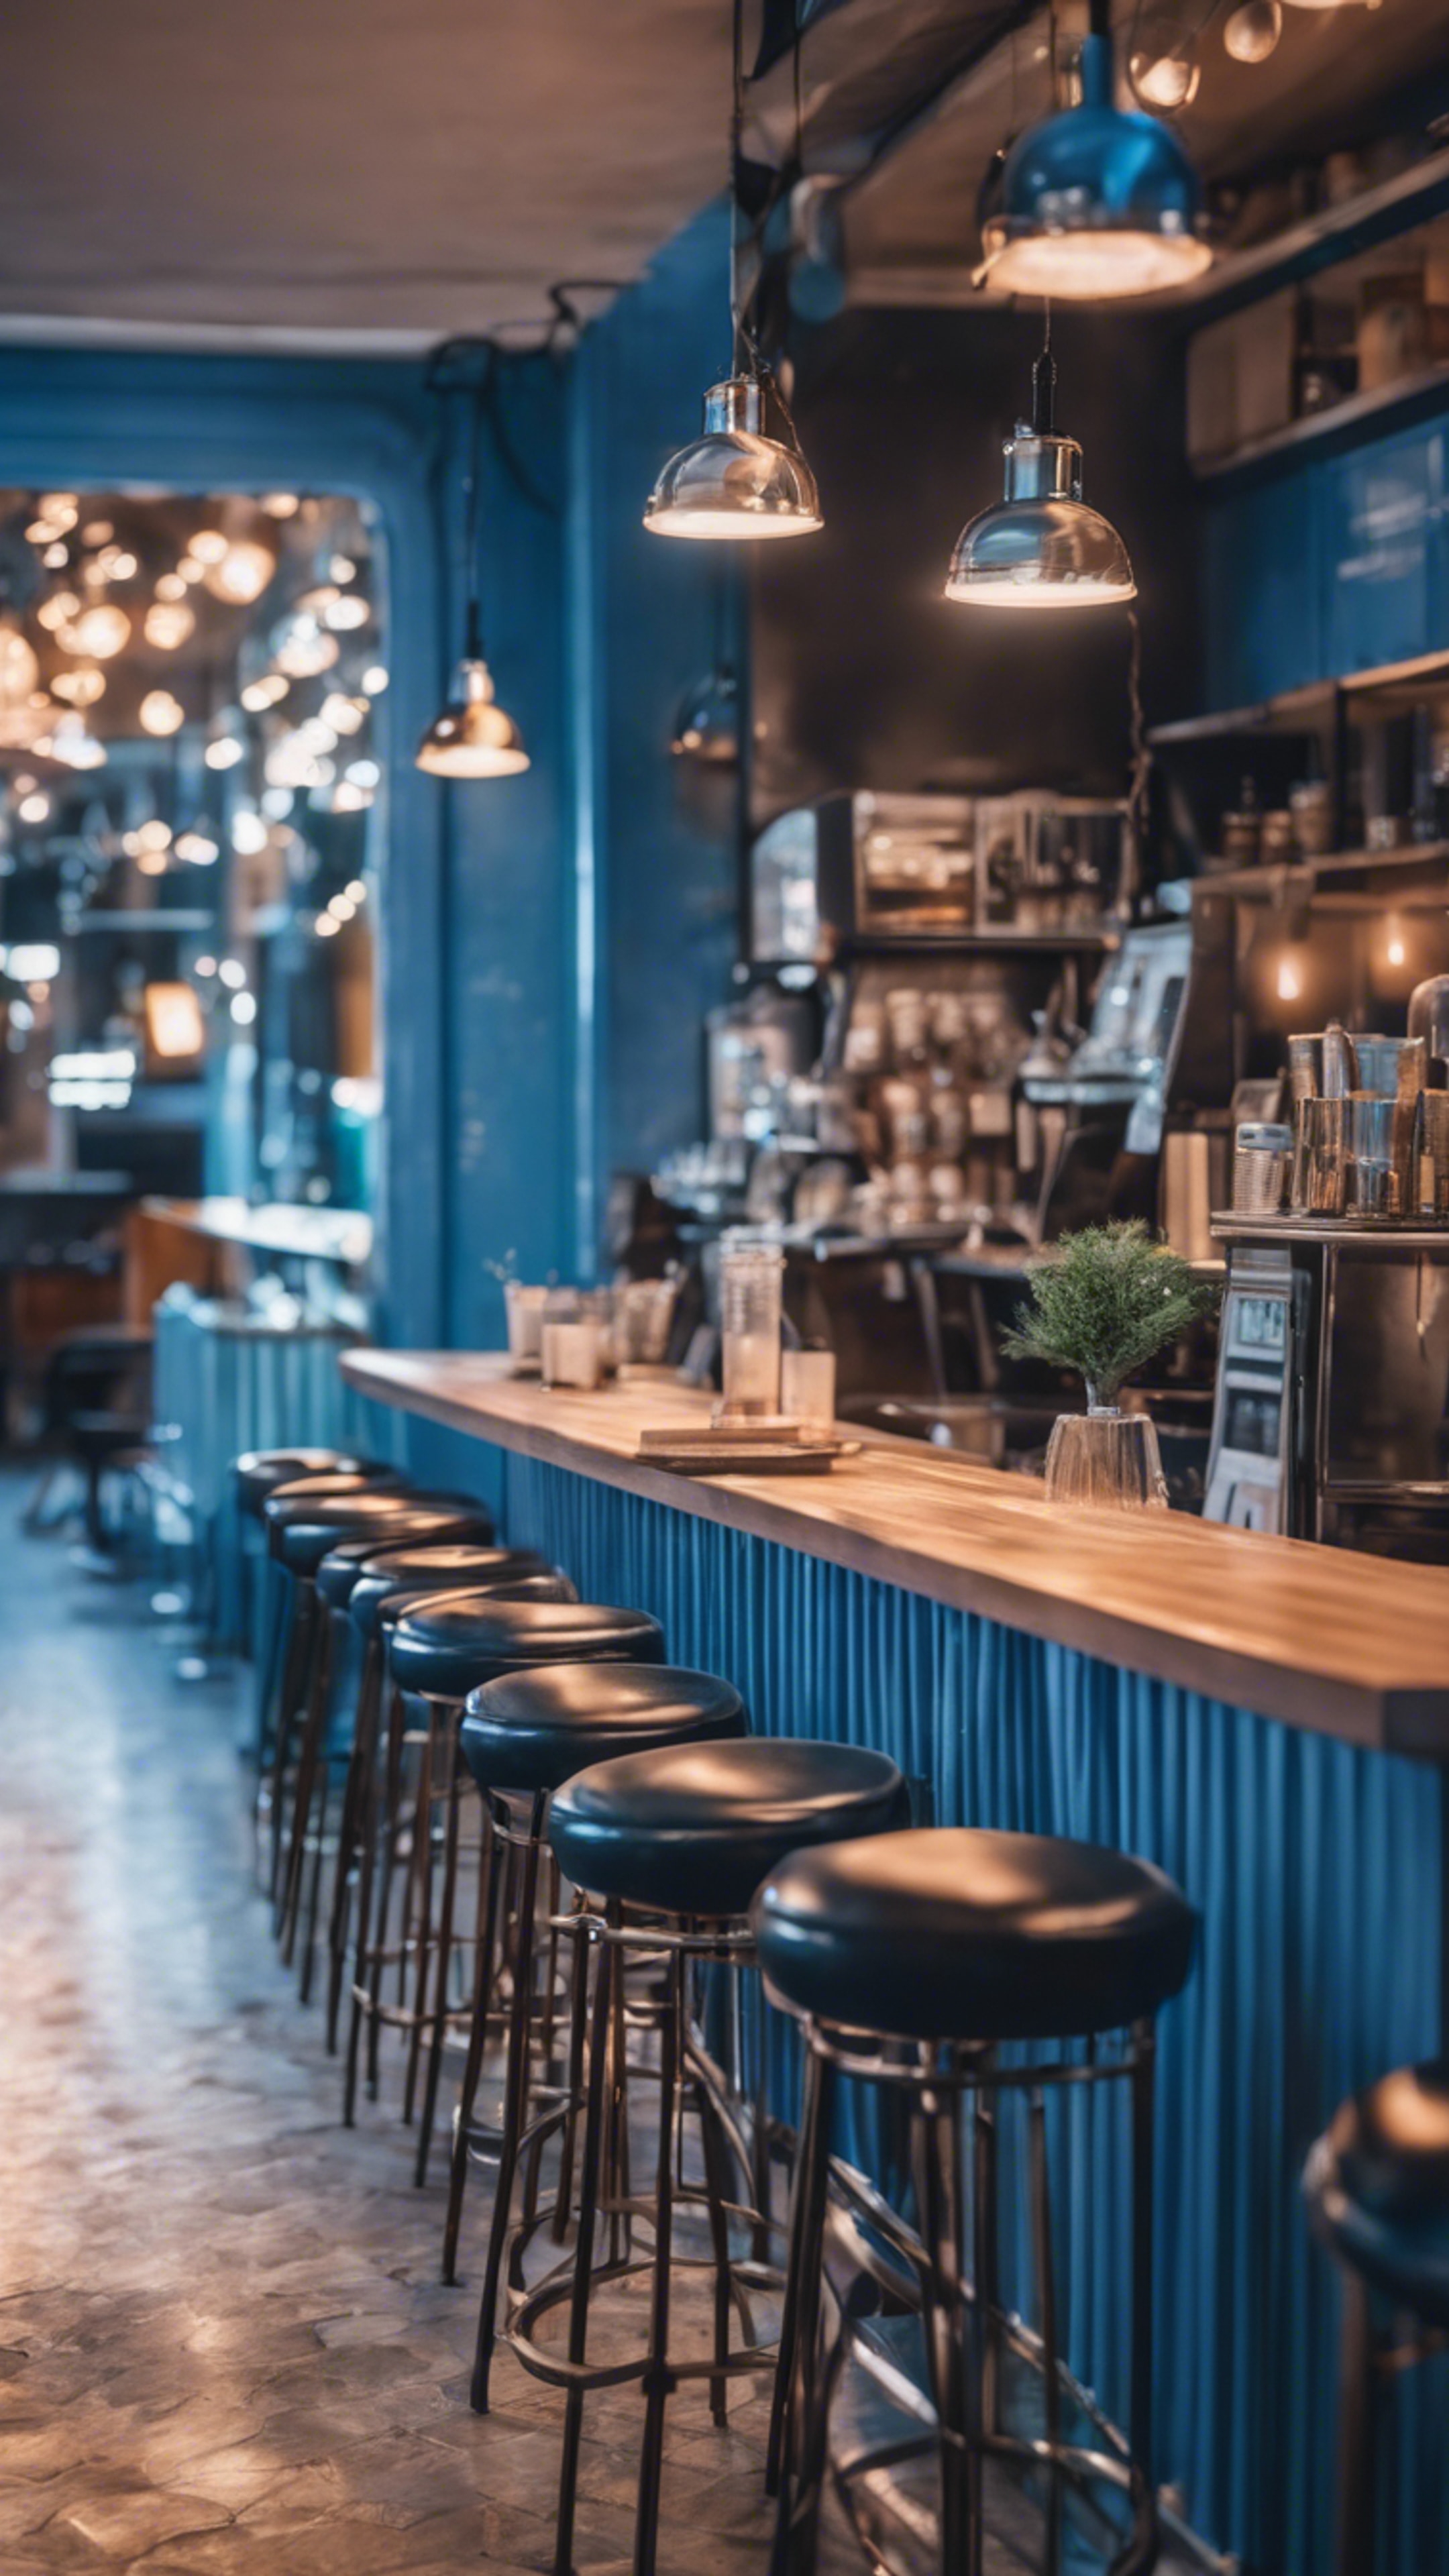 A chic urban cafe with cool blue interiors in the evening Fondo de pantalla[a944bfd98f8948b498de]